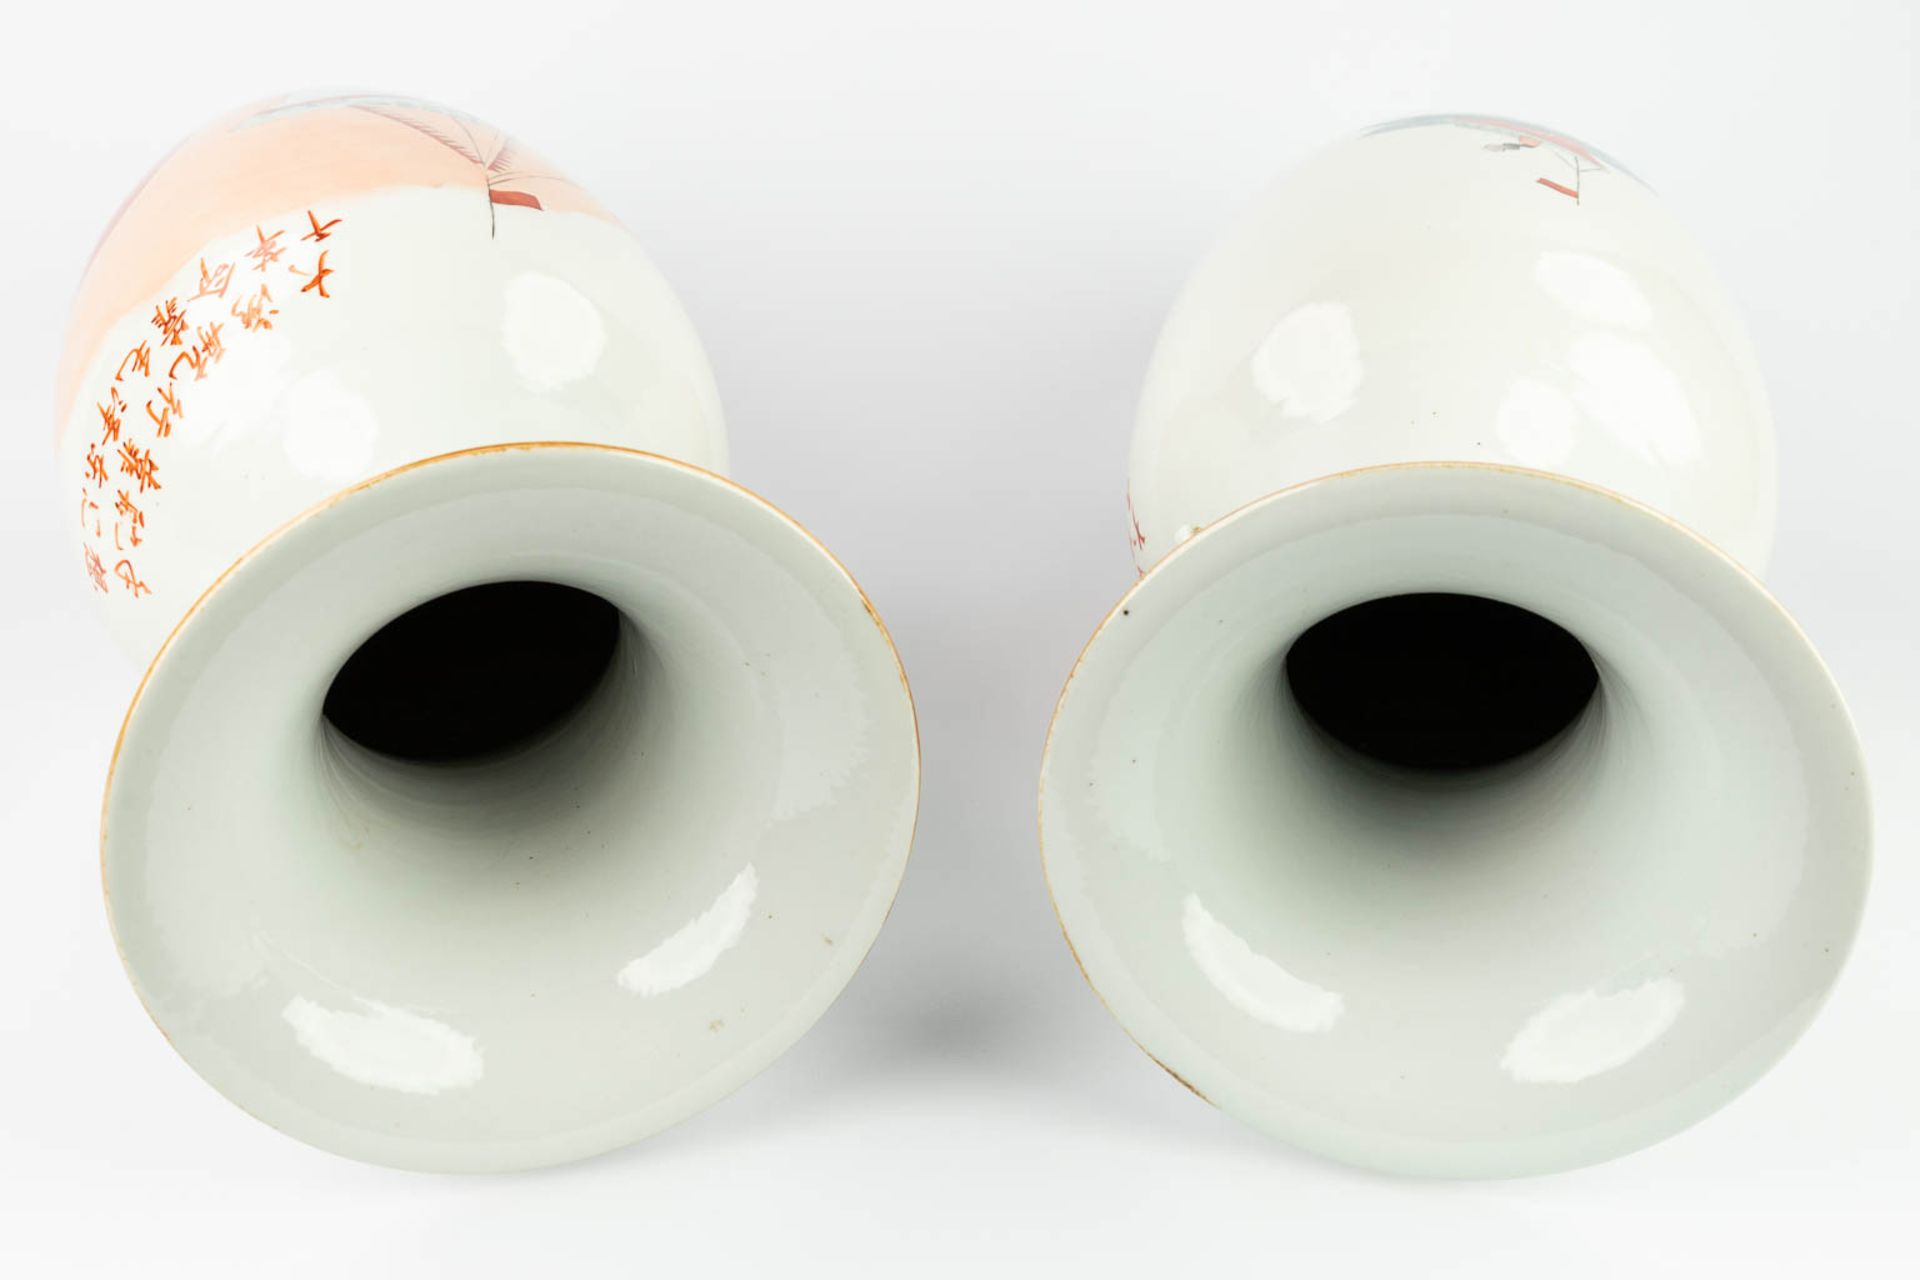 A pair of Chinese vases made of glazed porcelain, and decorated with ships (59,5 x 23 cm) - Image 9 of 14